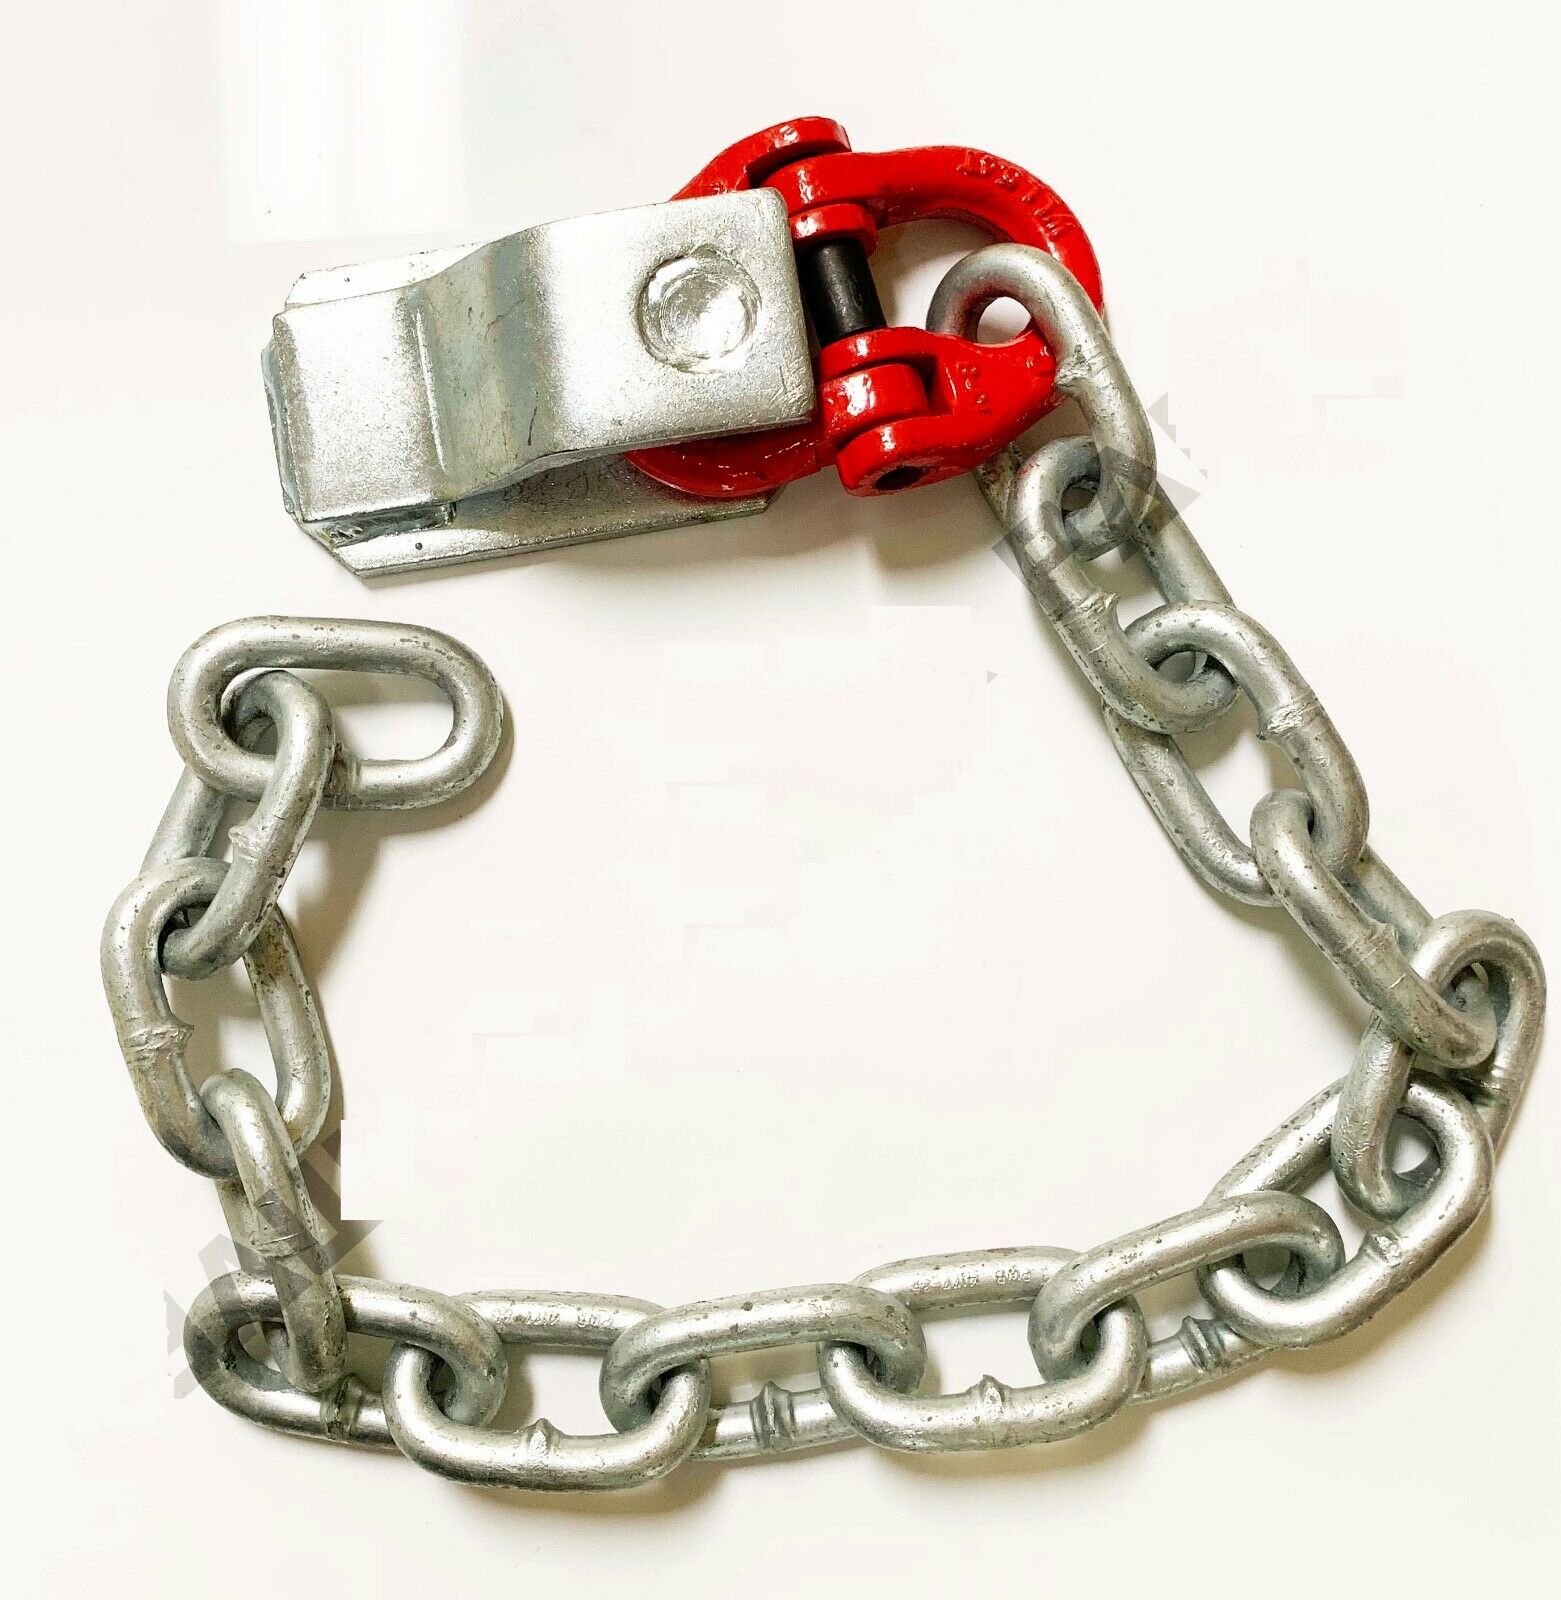 Weld on Hammer Lock Chain Kit 13mm Rated up to 3.5t